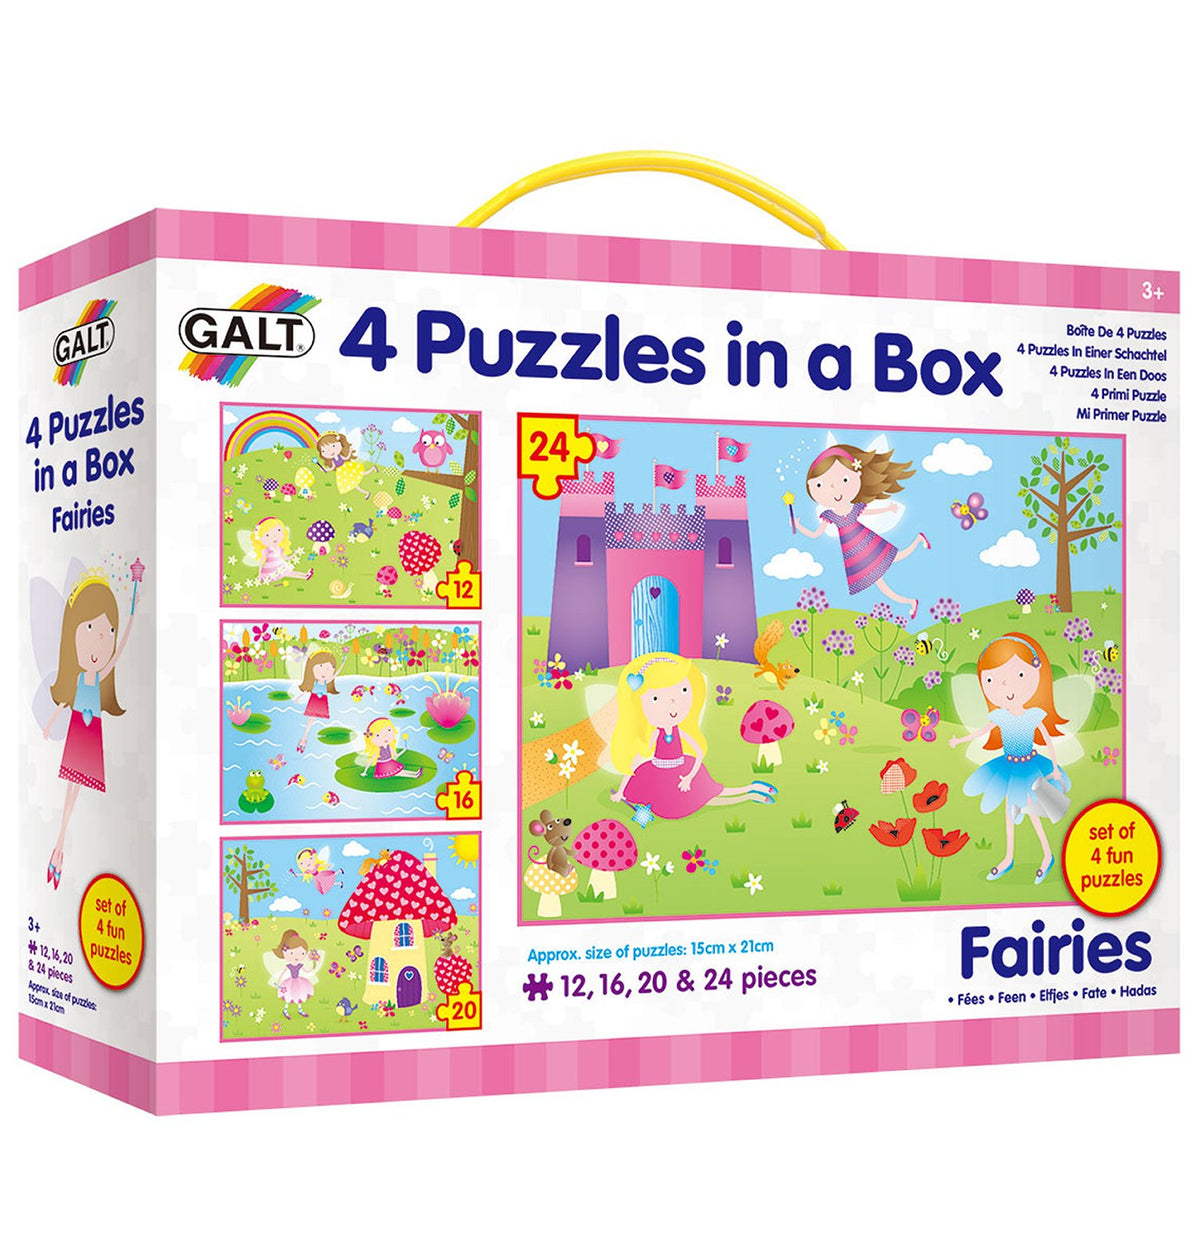 4 Puzzles in a Box - Galt